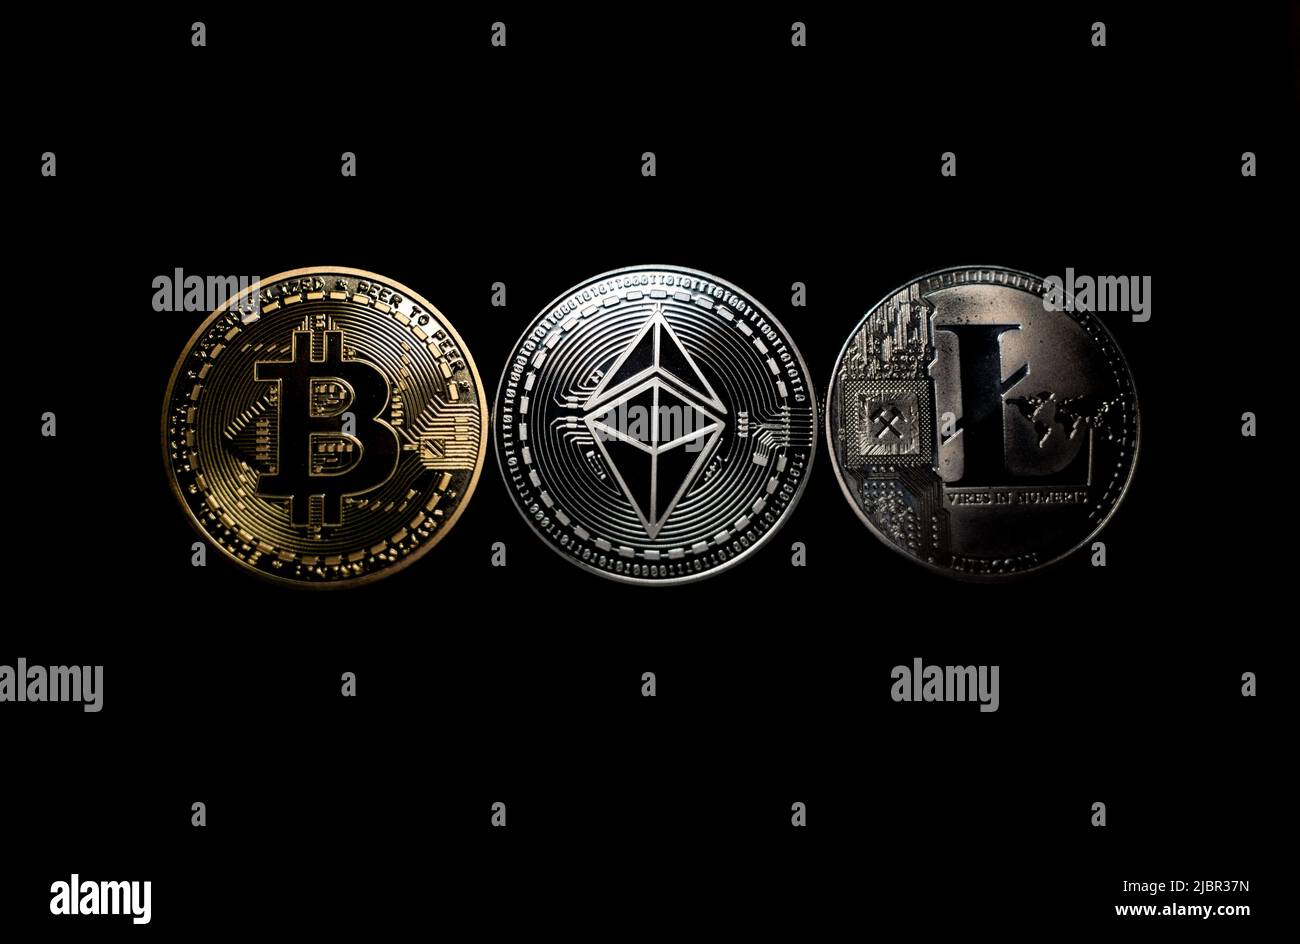 Bitcoin Ethereum and Litecoin on dark background. Gold and Silver shining Crypto coins. Blockchain technology. Digital commerce and payment systems. Stock Photo